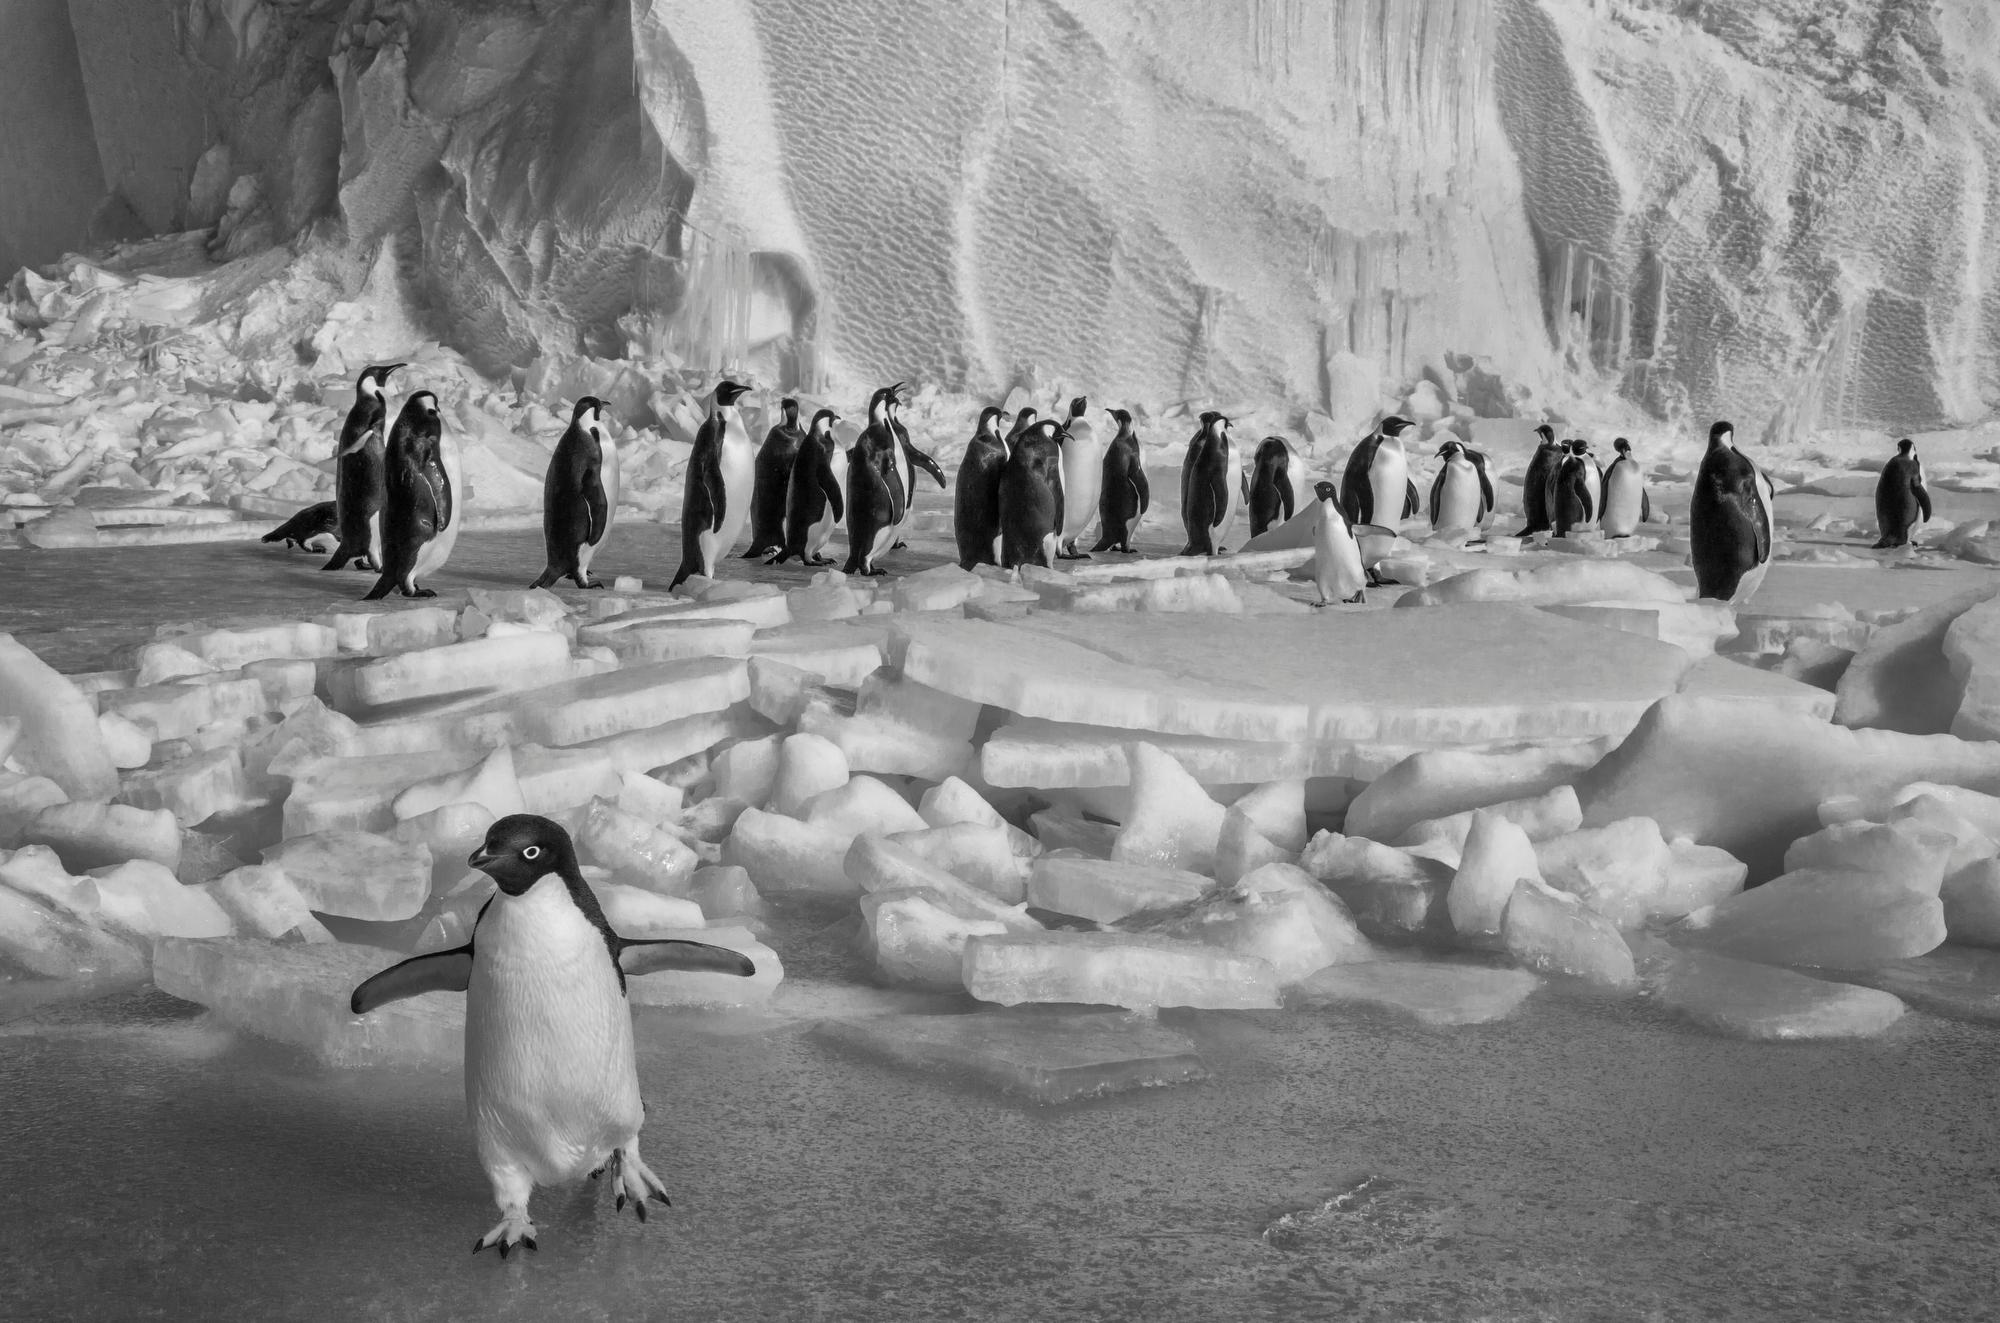 Paul Nicklen Black and White Photograph - Renegade